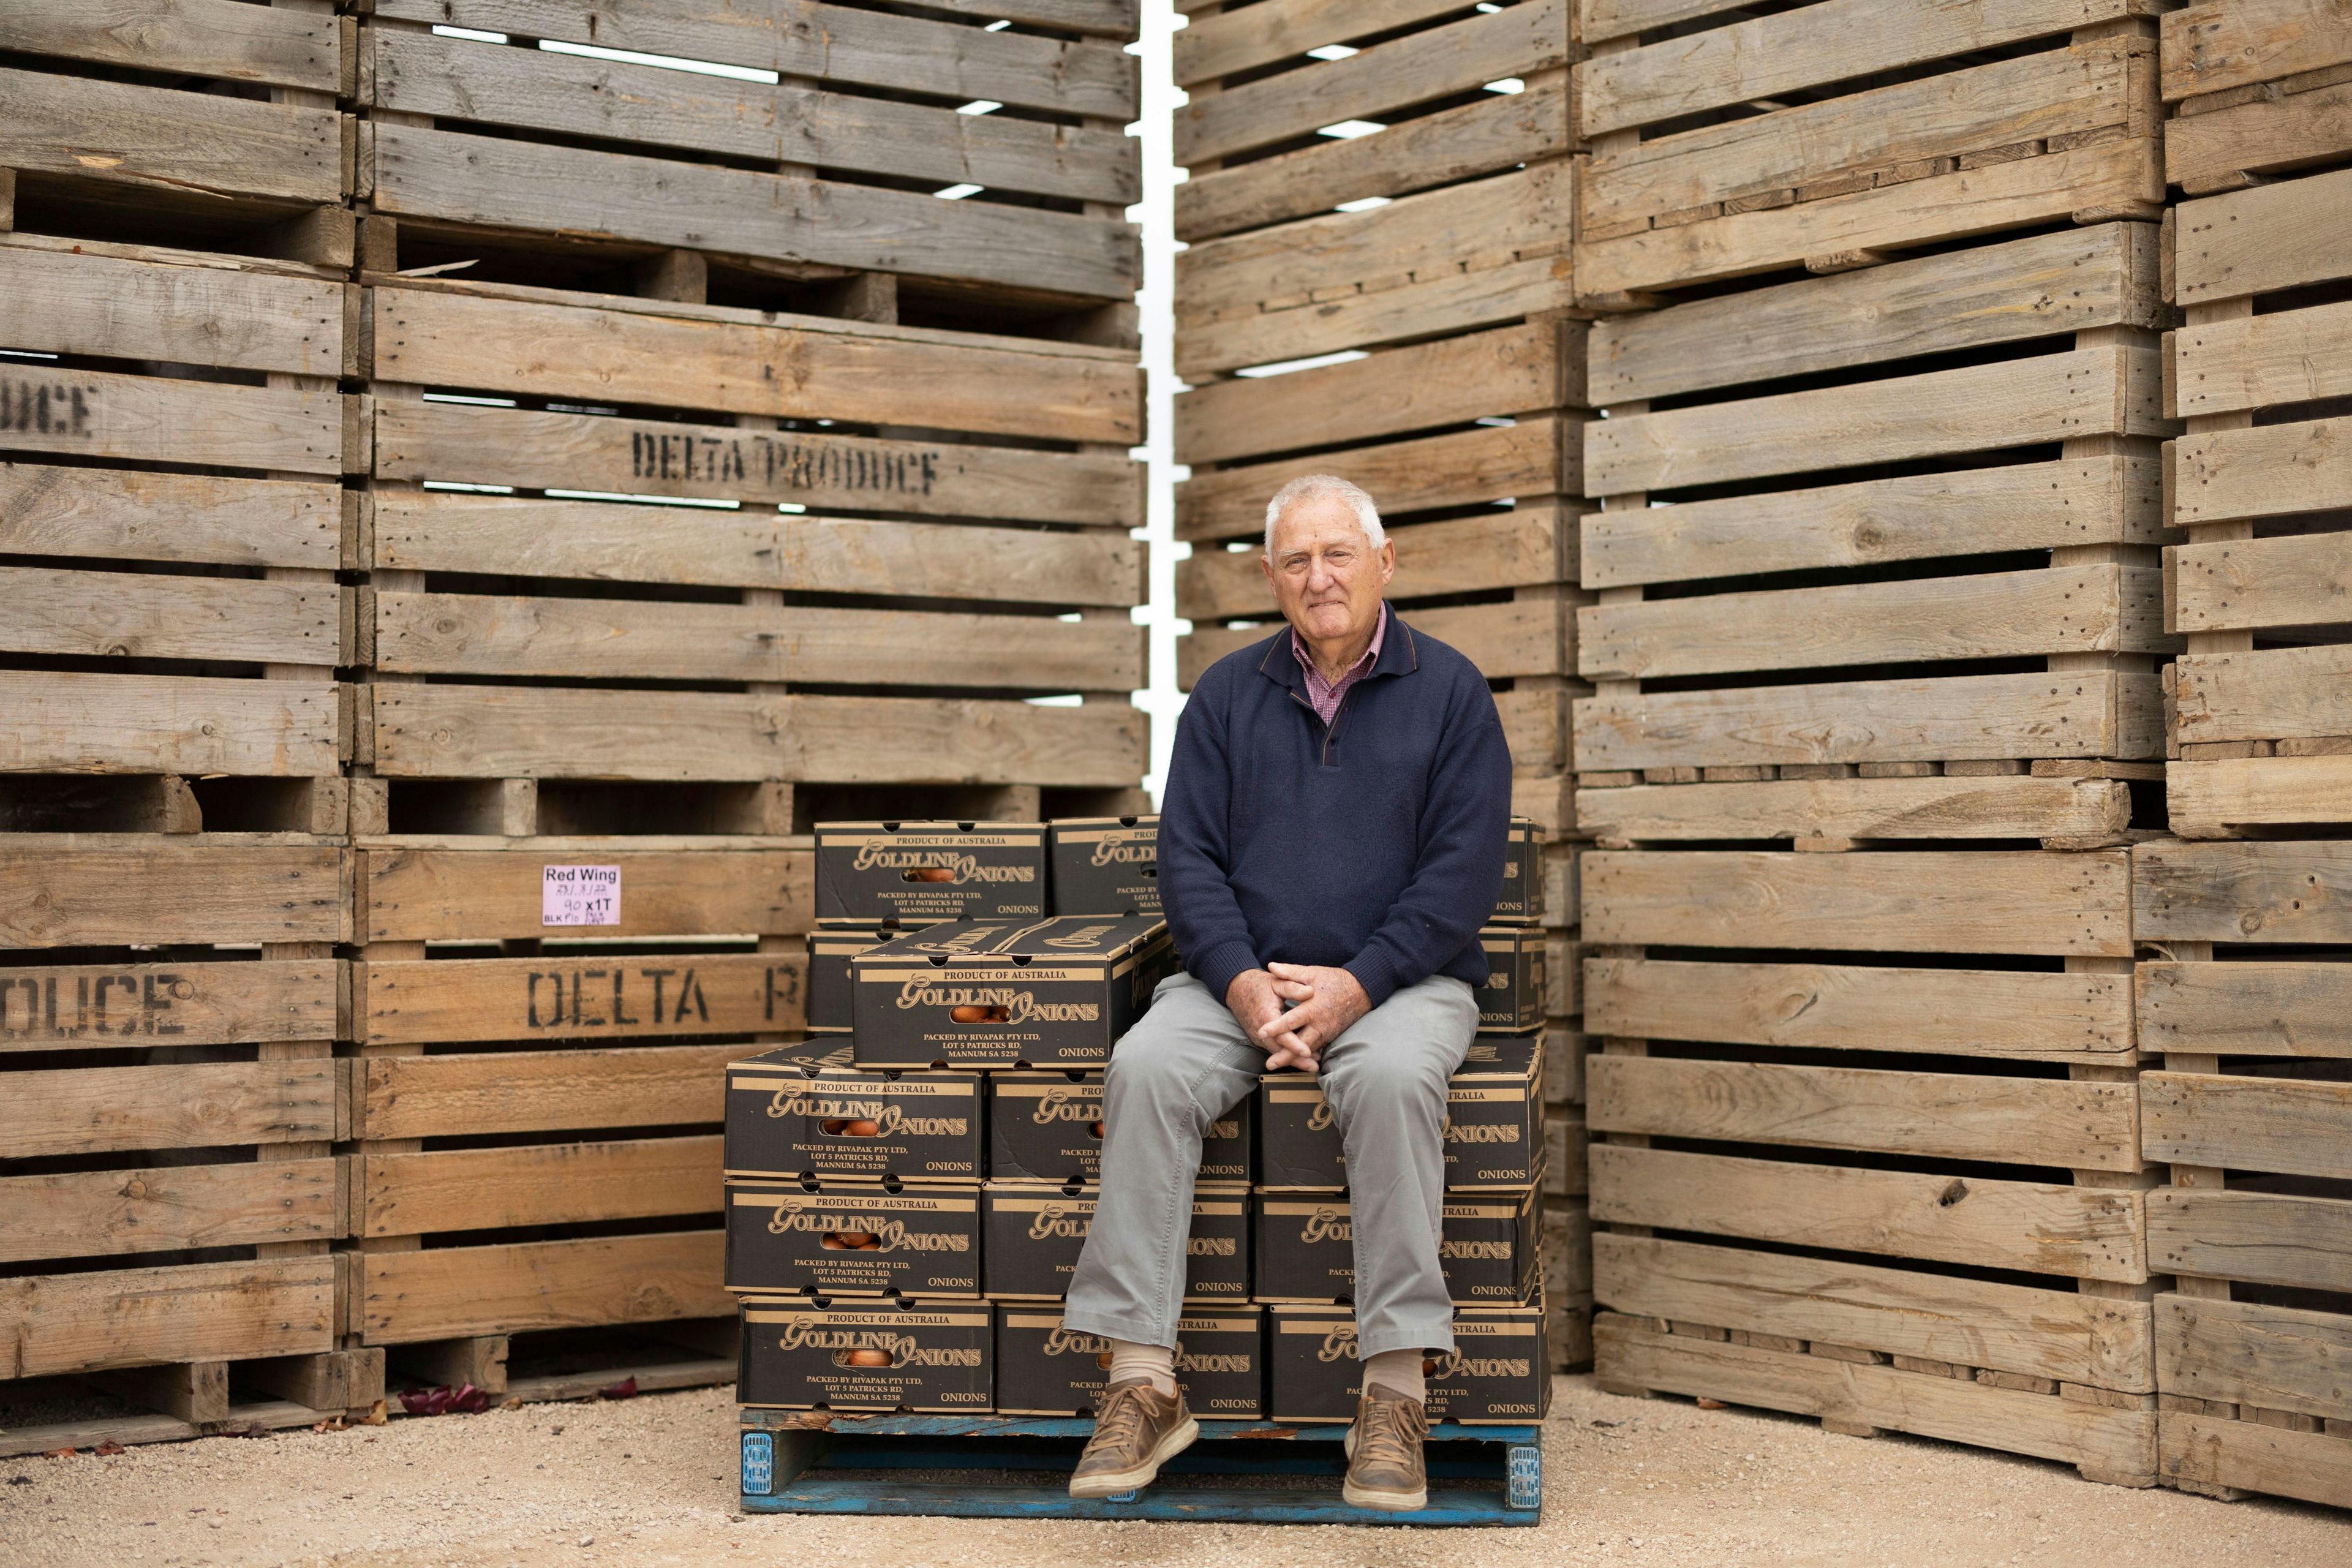 Riverpak onion farmer sitting on onion boxes surrounded by crates